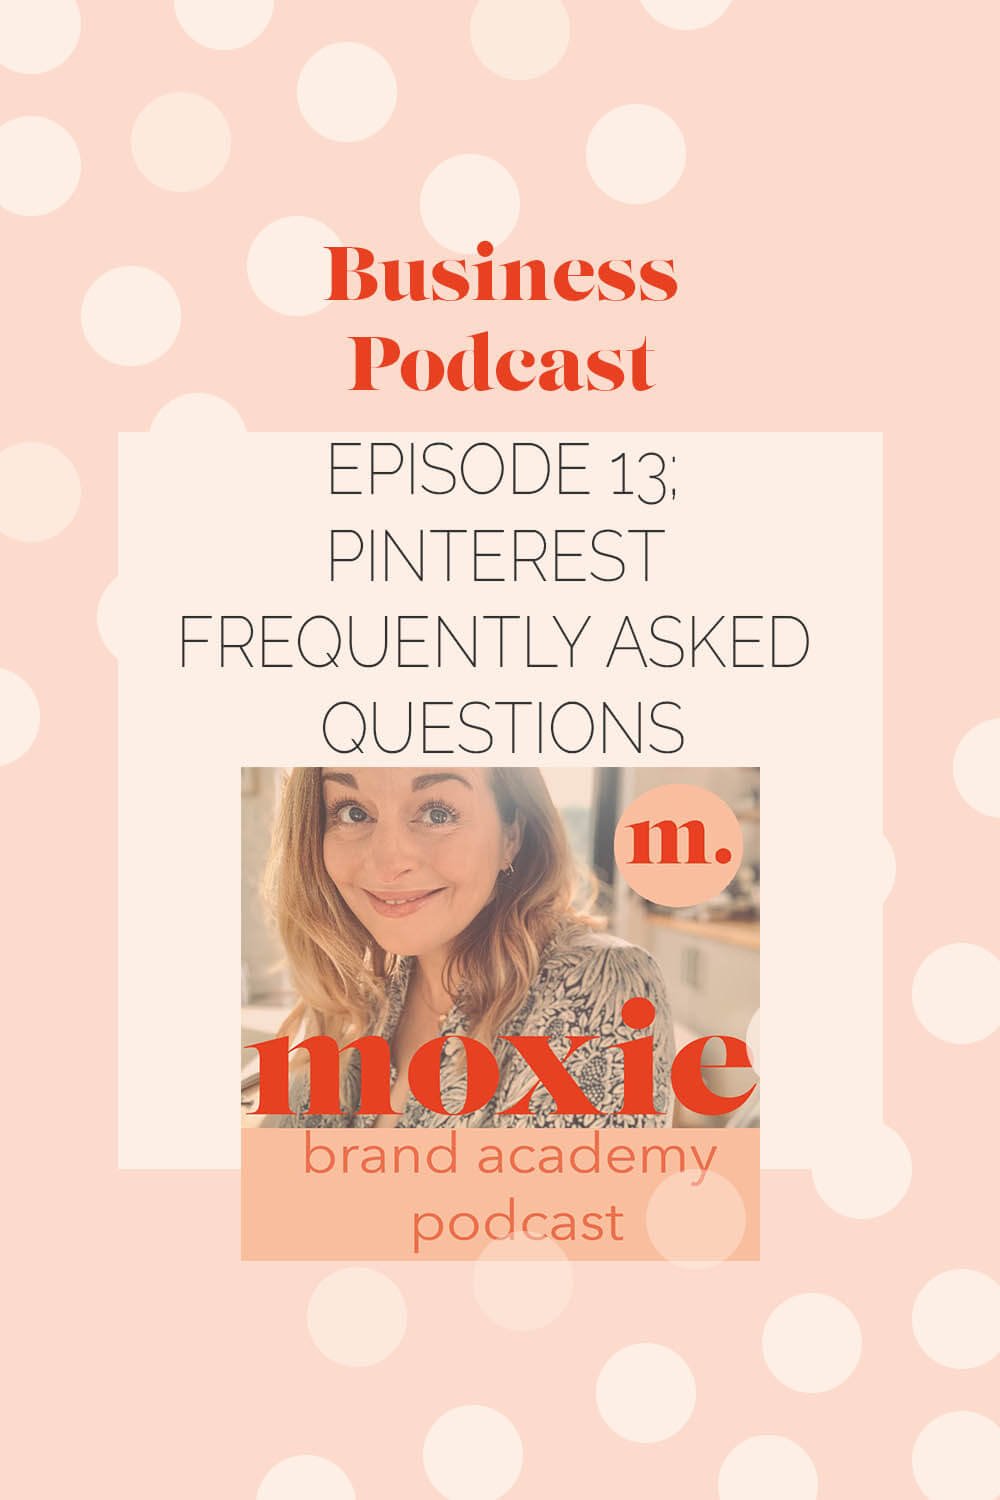 Pinterest Frequently asked questions